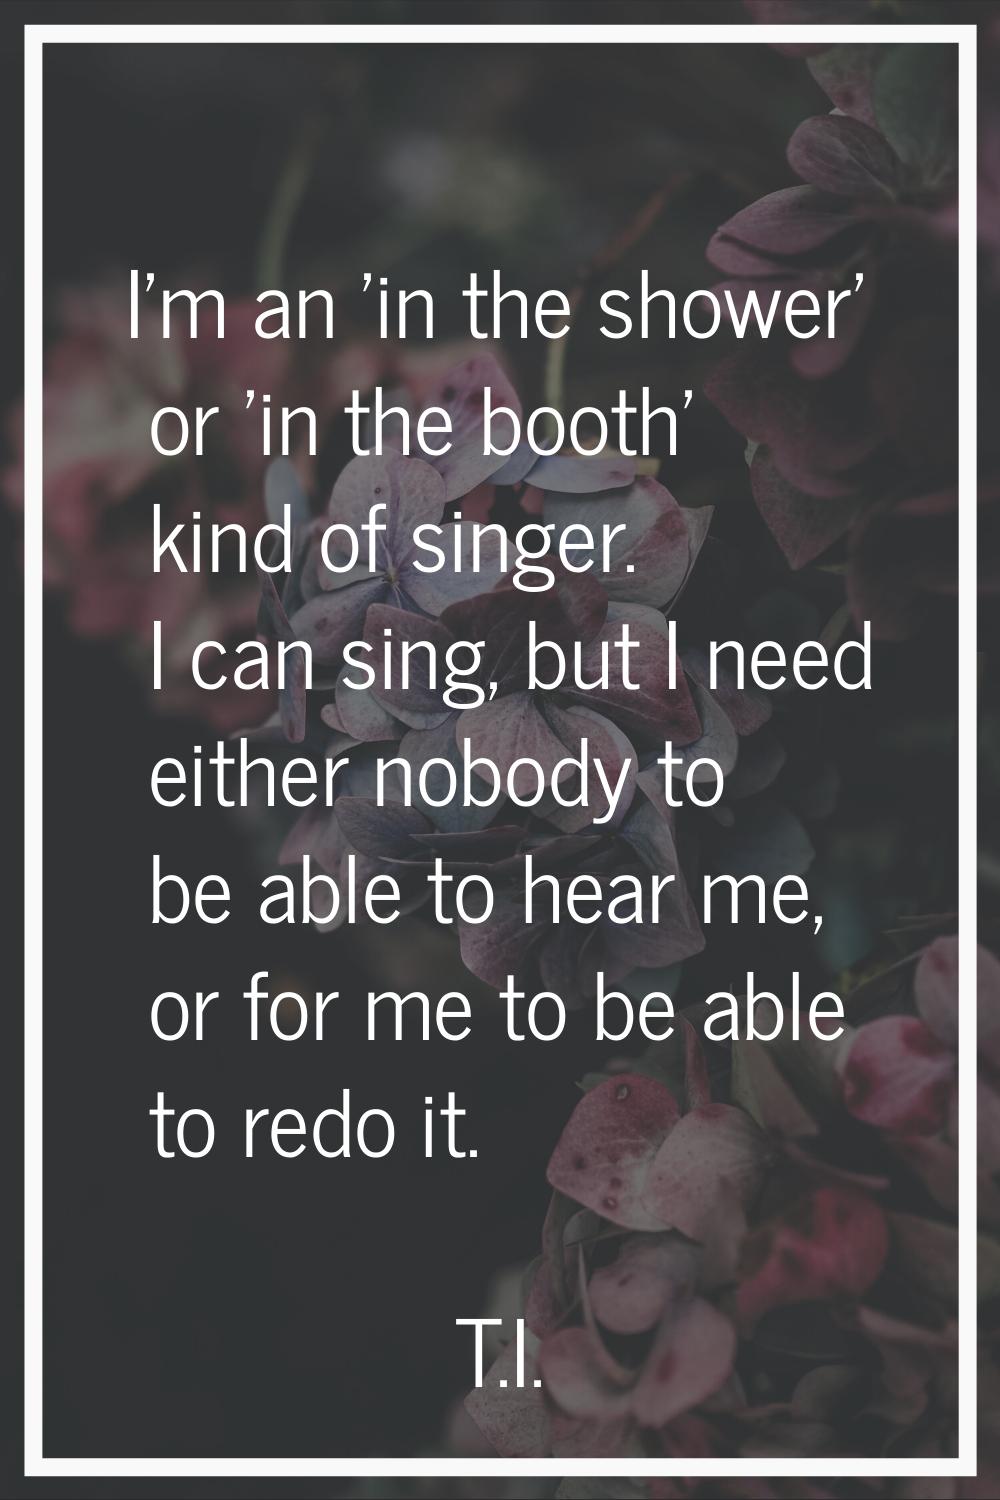 I'm an 'in the shower' or 'in the booth' kind of singer. I can sing, but I need either nobody to be